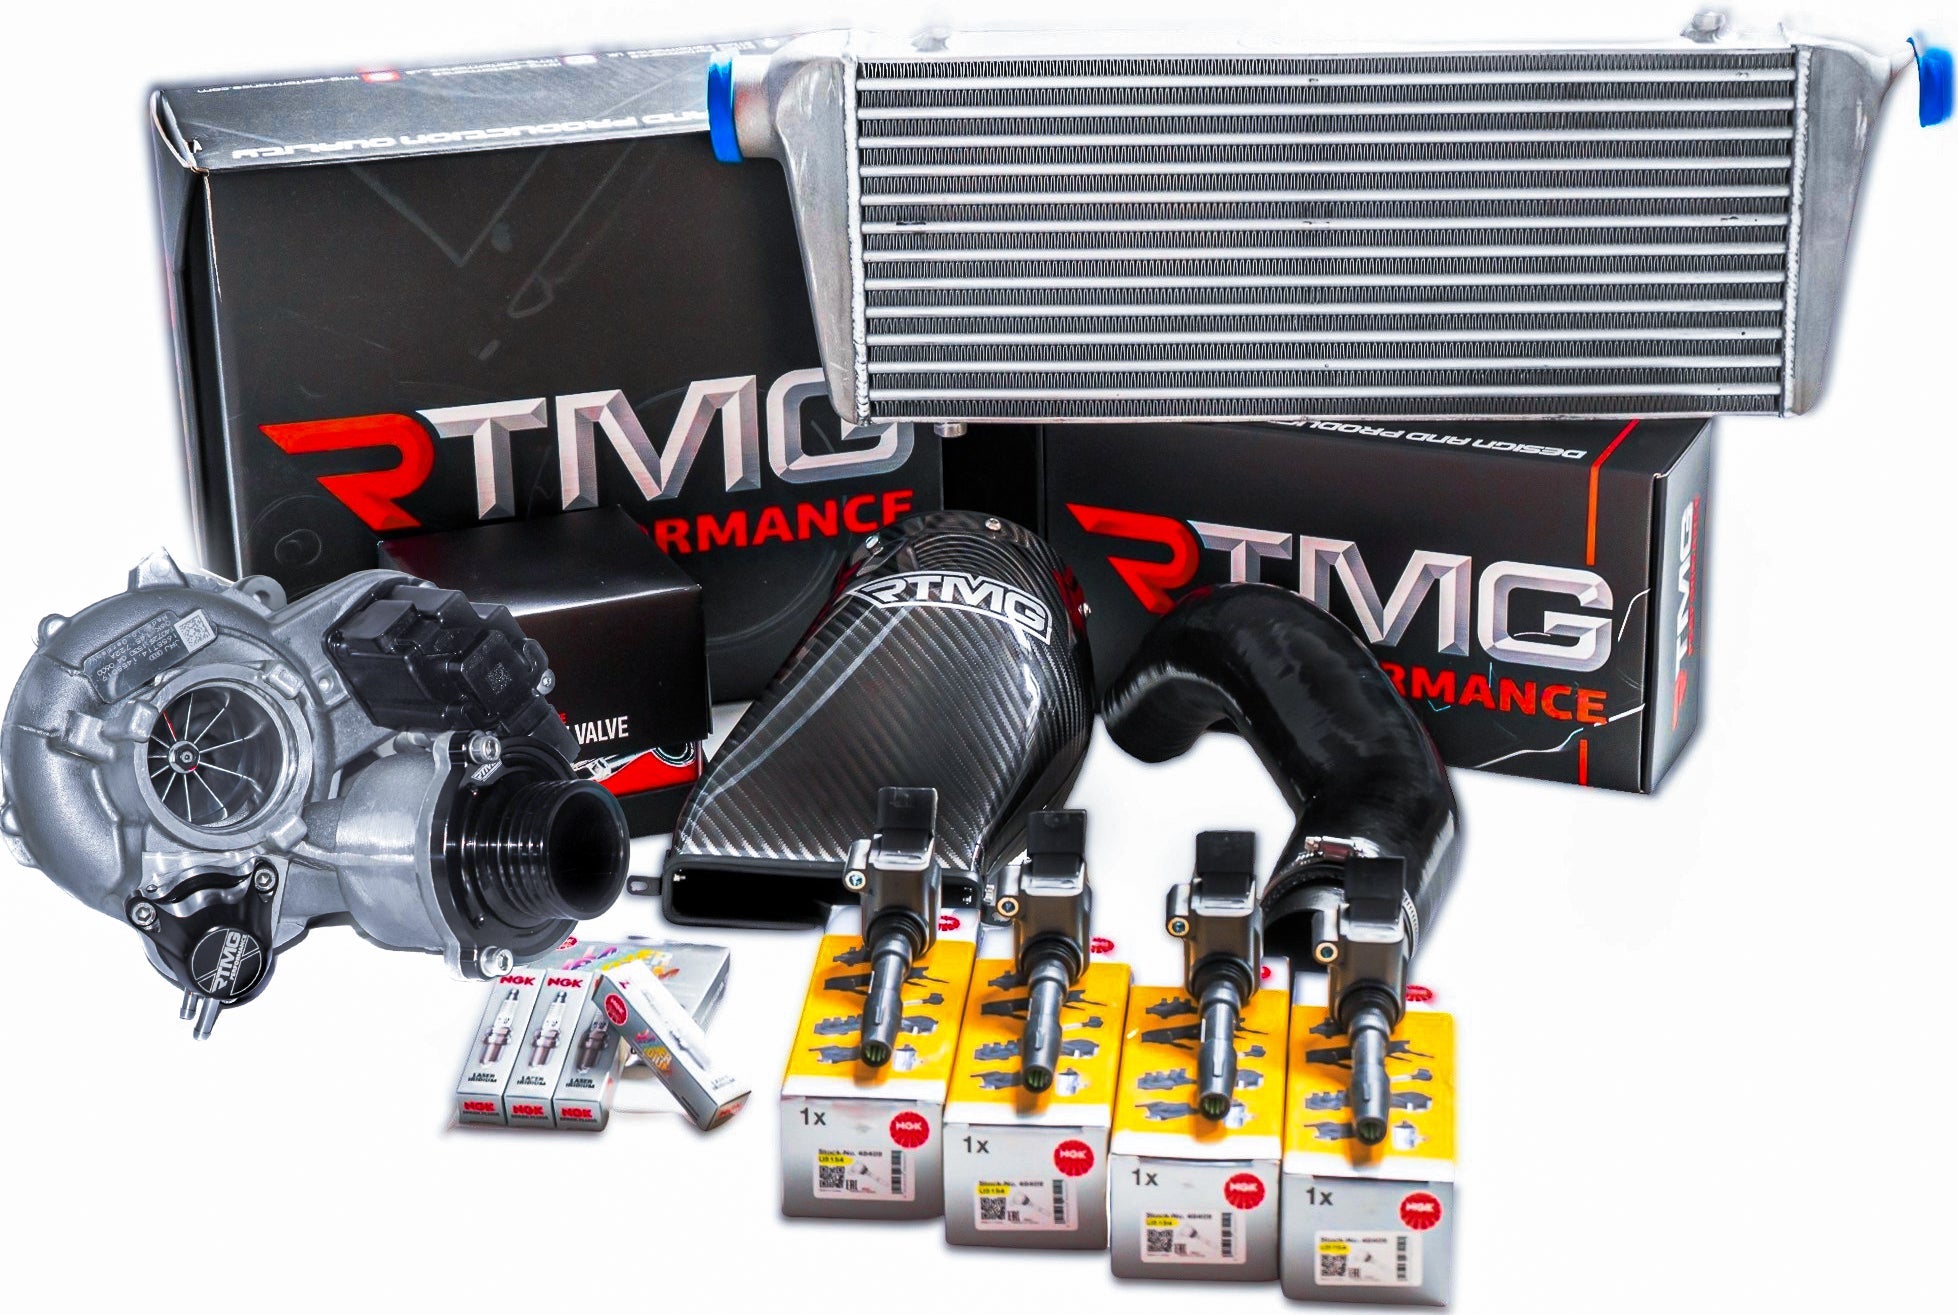 Stage 3 Tuning Kit for 2.0 TSI EA888 Gen 3 470-550 HP - RTMG Performance